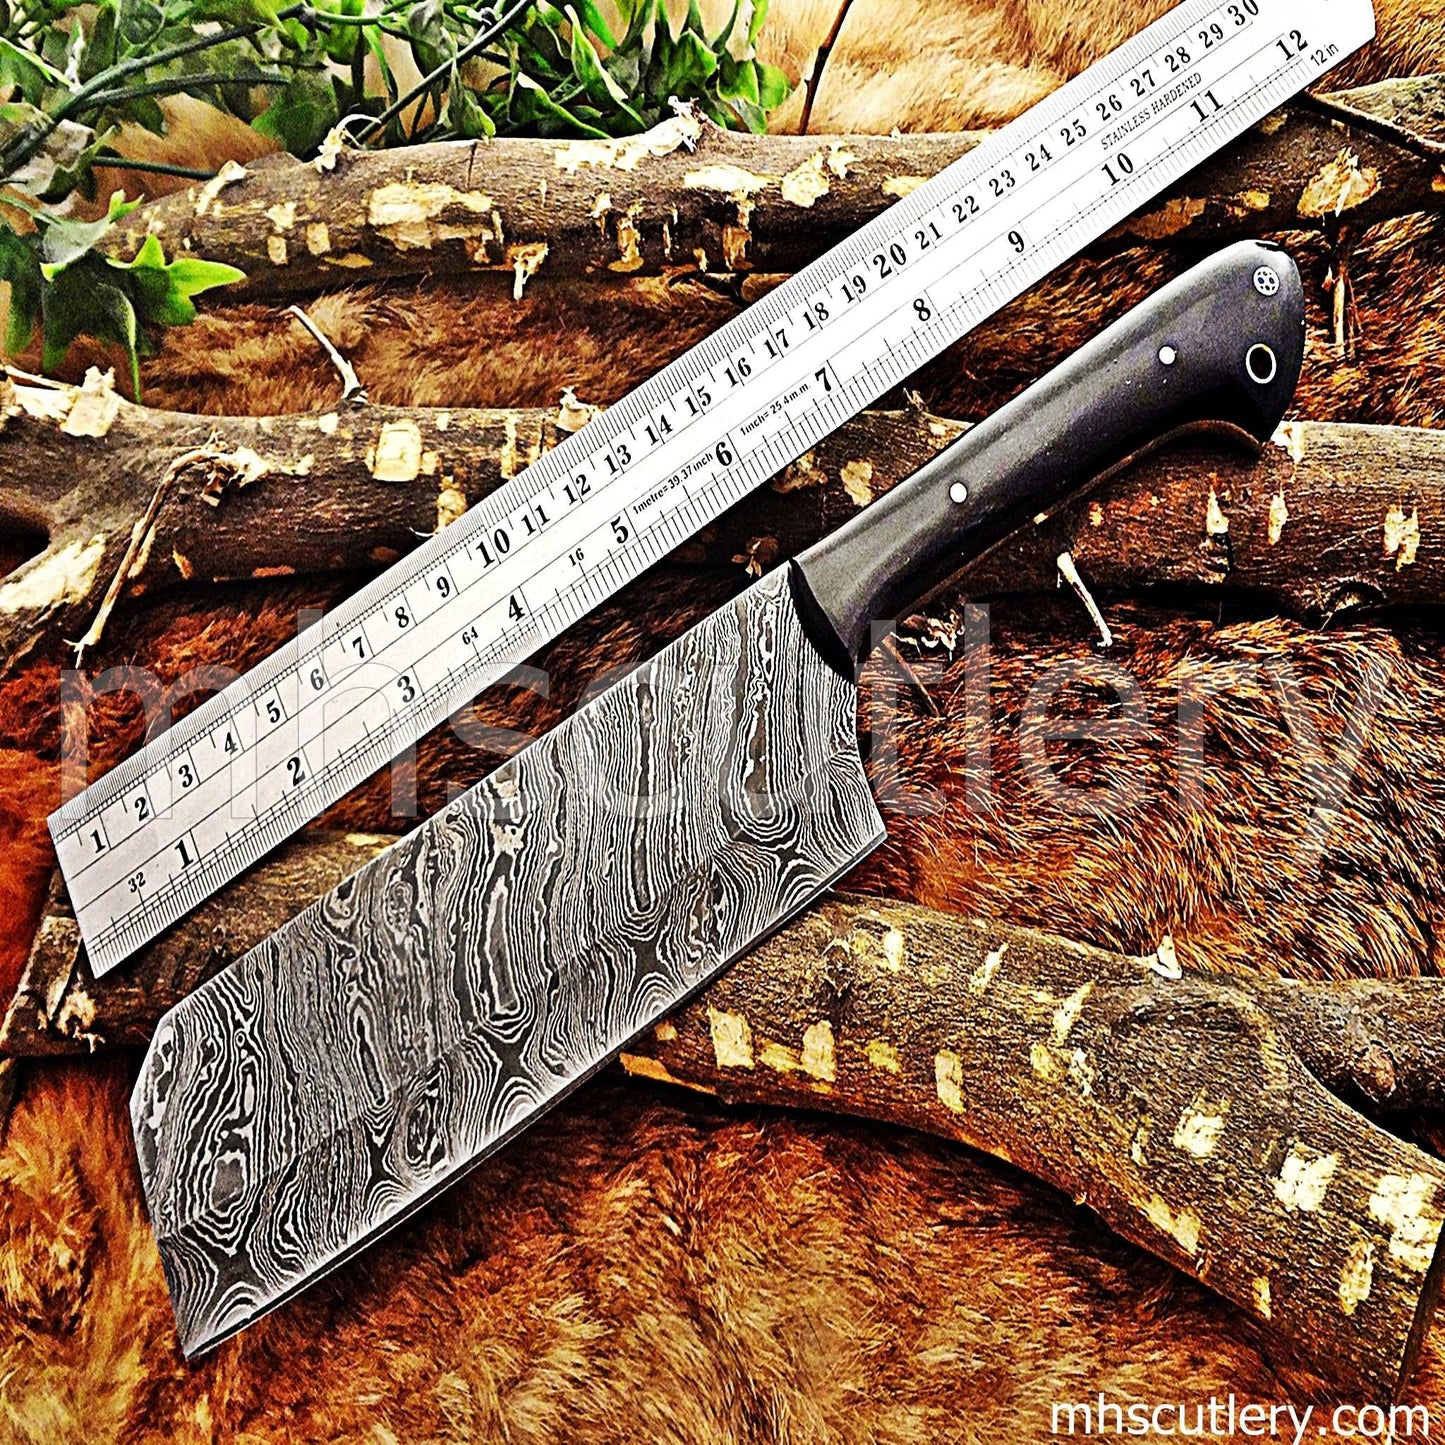 Custom Hand Forged Damascus Steel Meat Cleaver | mhscutlery